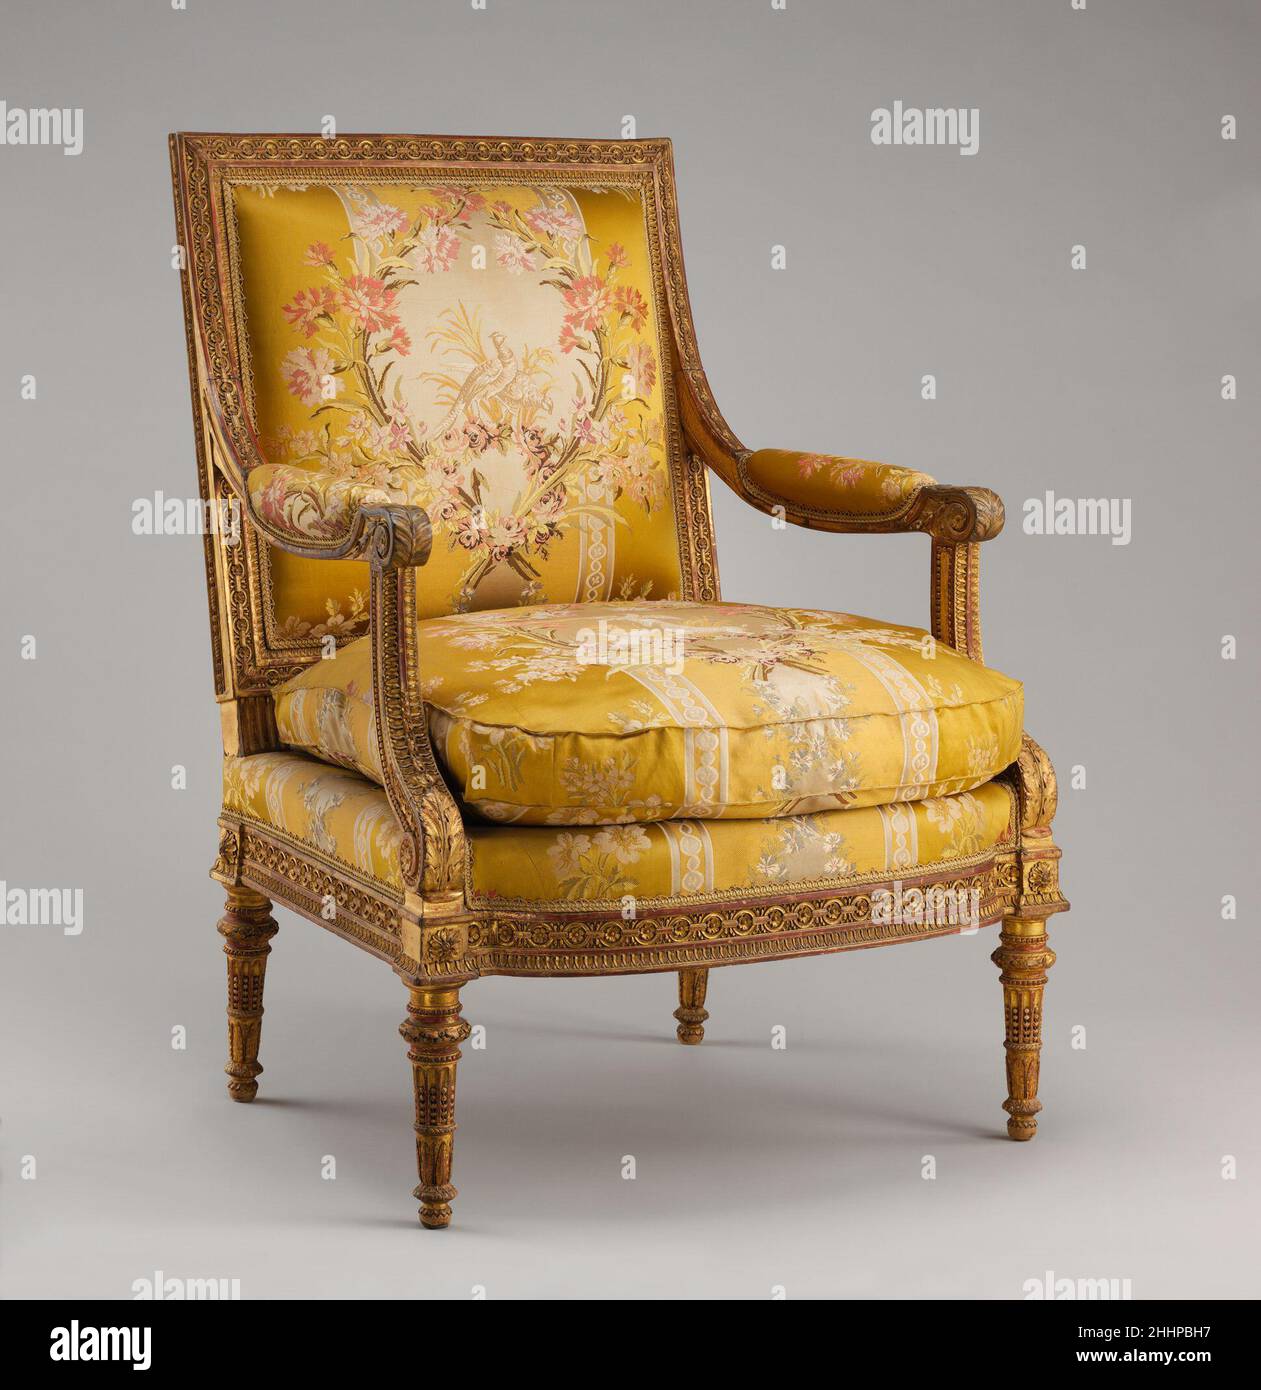 1920s French Louis XV Rococo Style Gold Gilt Parlor Chair Armchair